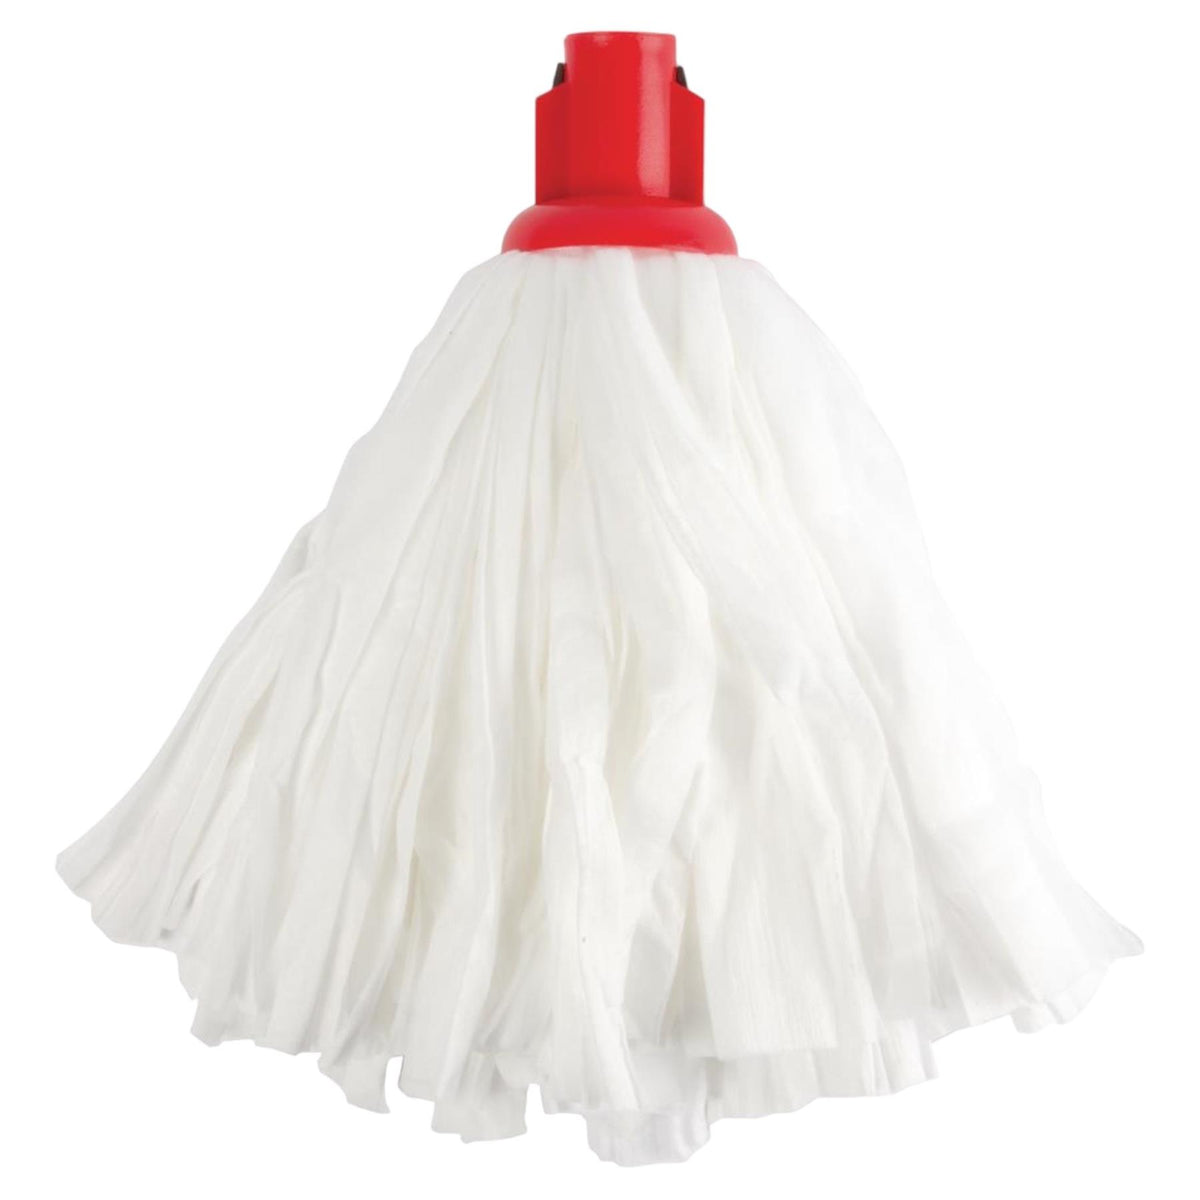 Single Red Exel Disposable Mop Heads 117 Grams